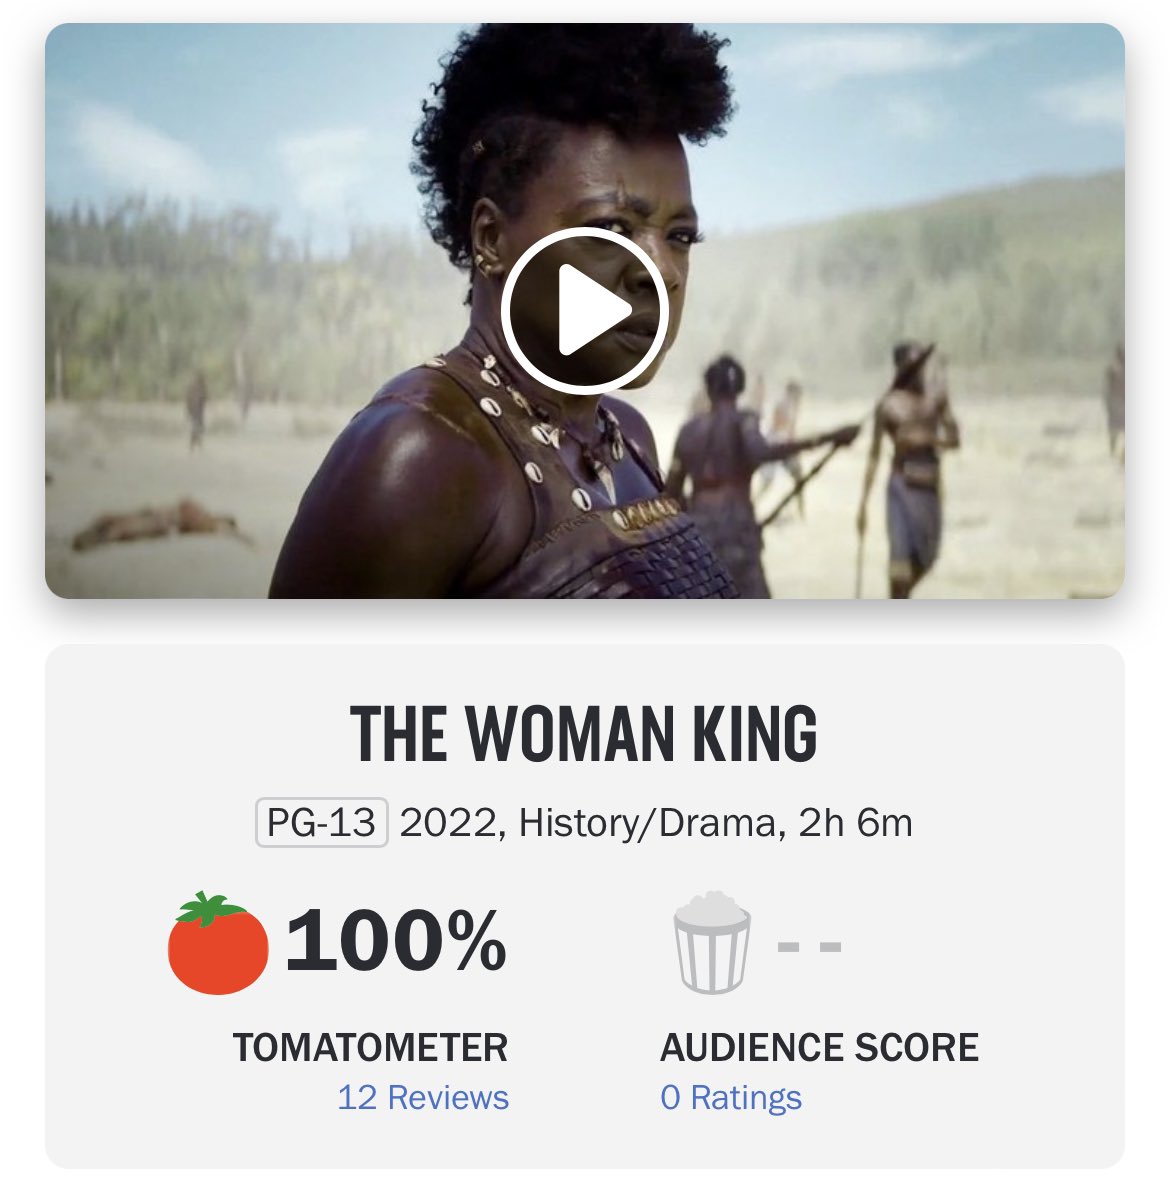 #TheWomanKing  starring Viola Davis debuts with a perfect score of 100% on Rotten Tomatoes.